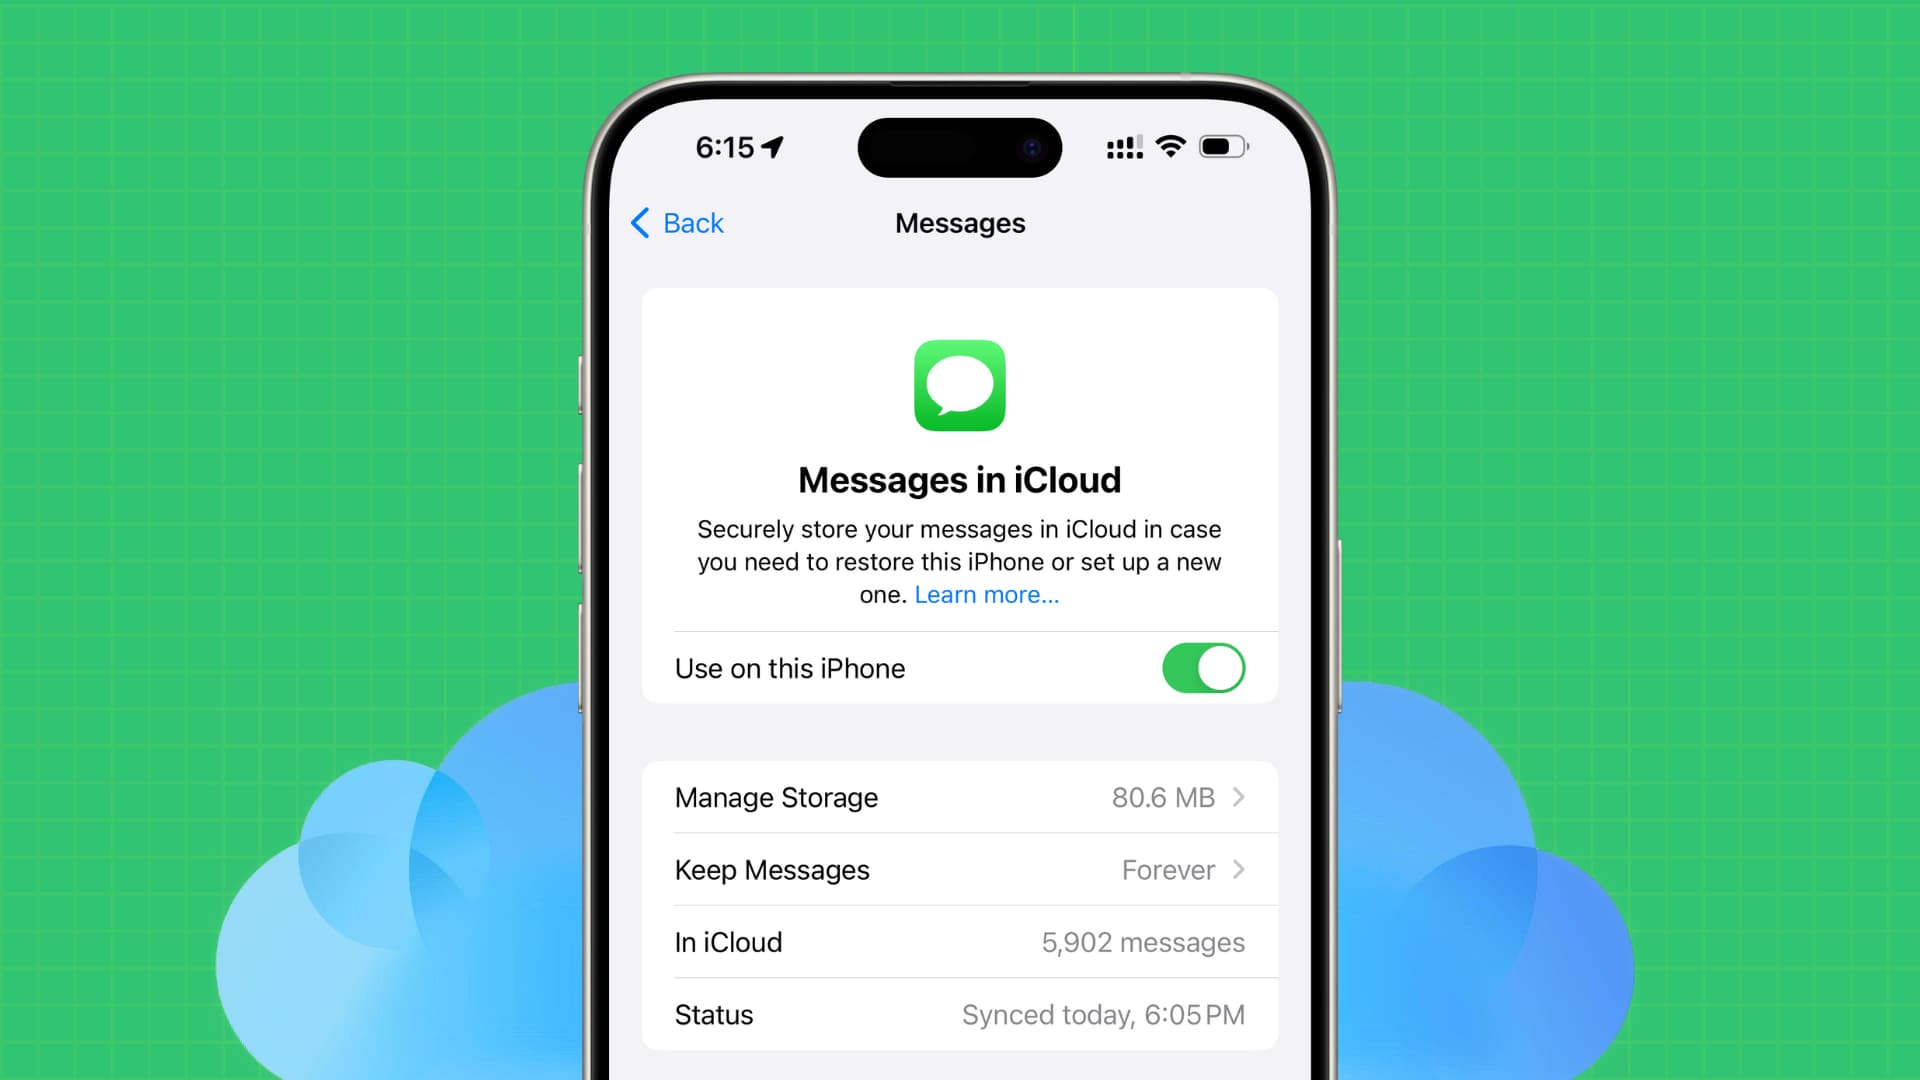 Messages in iCloud feature on iPhone